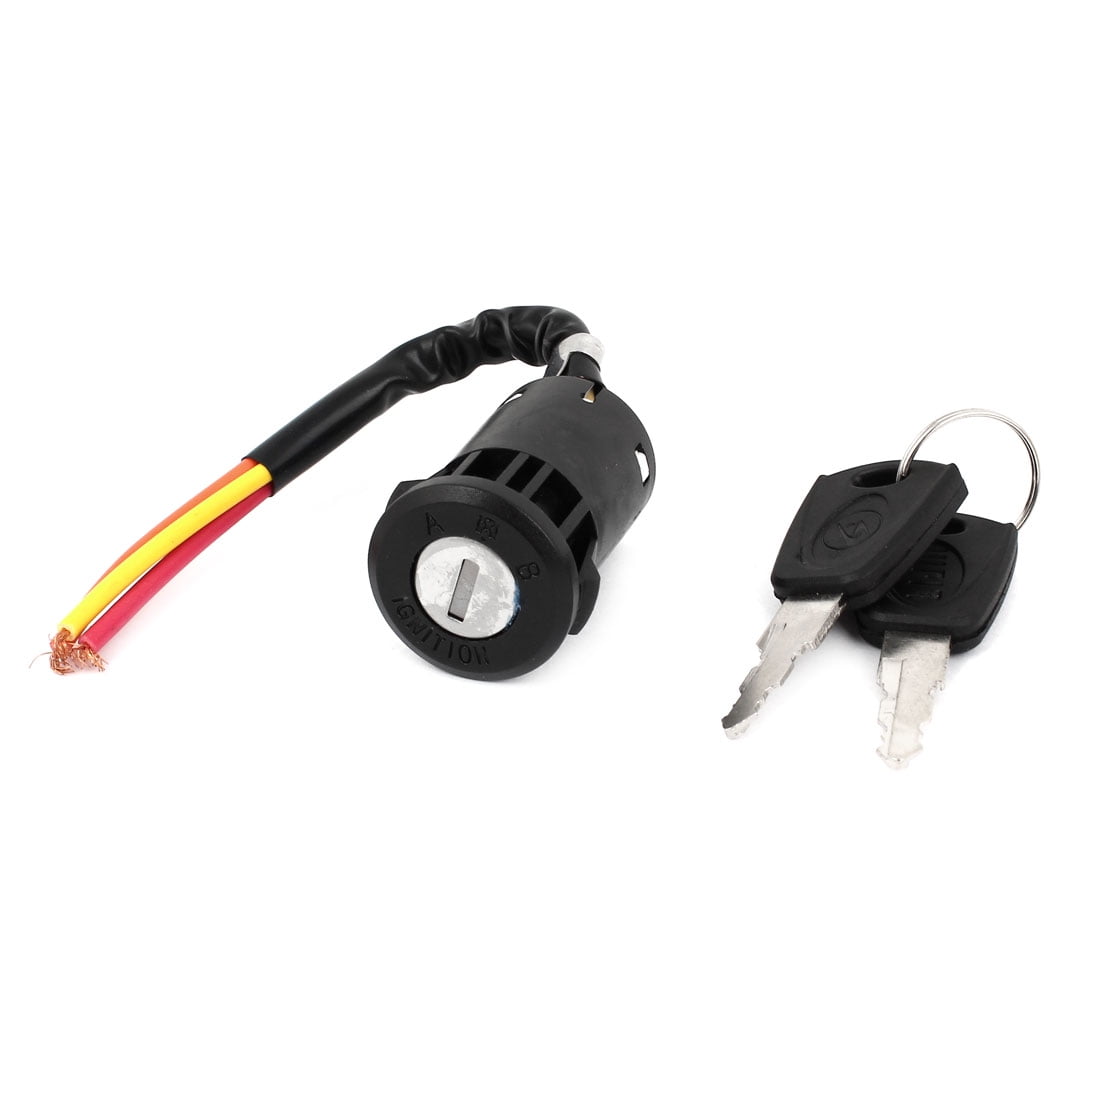 Switch and Button  Electric Bike Bicycle 3 Wire On-Off-onIgnition Switch Lock w 2 Keys 